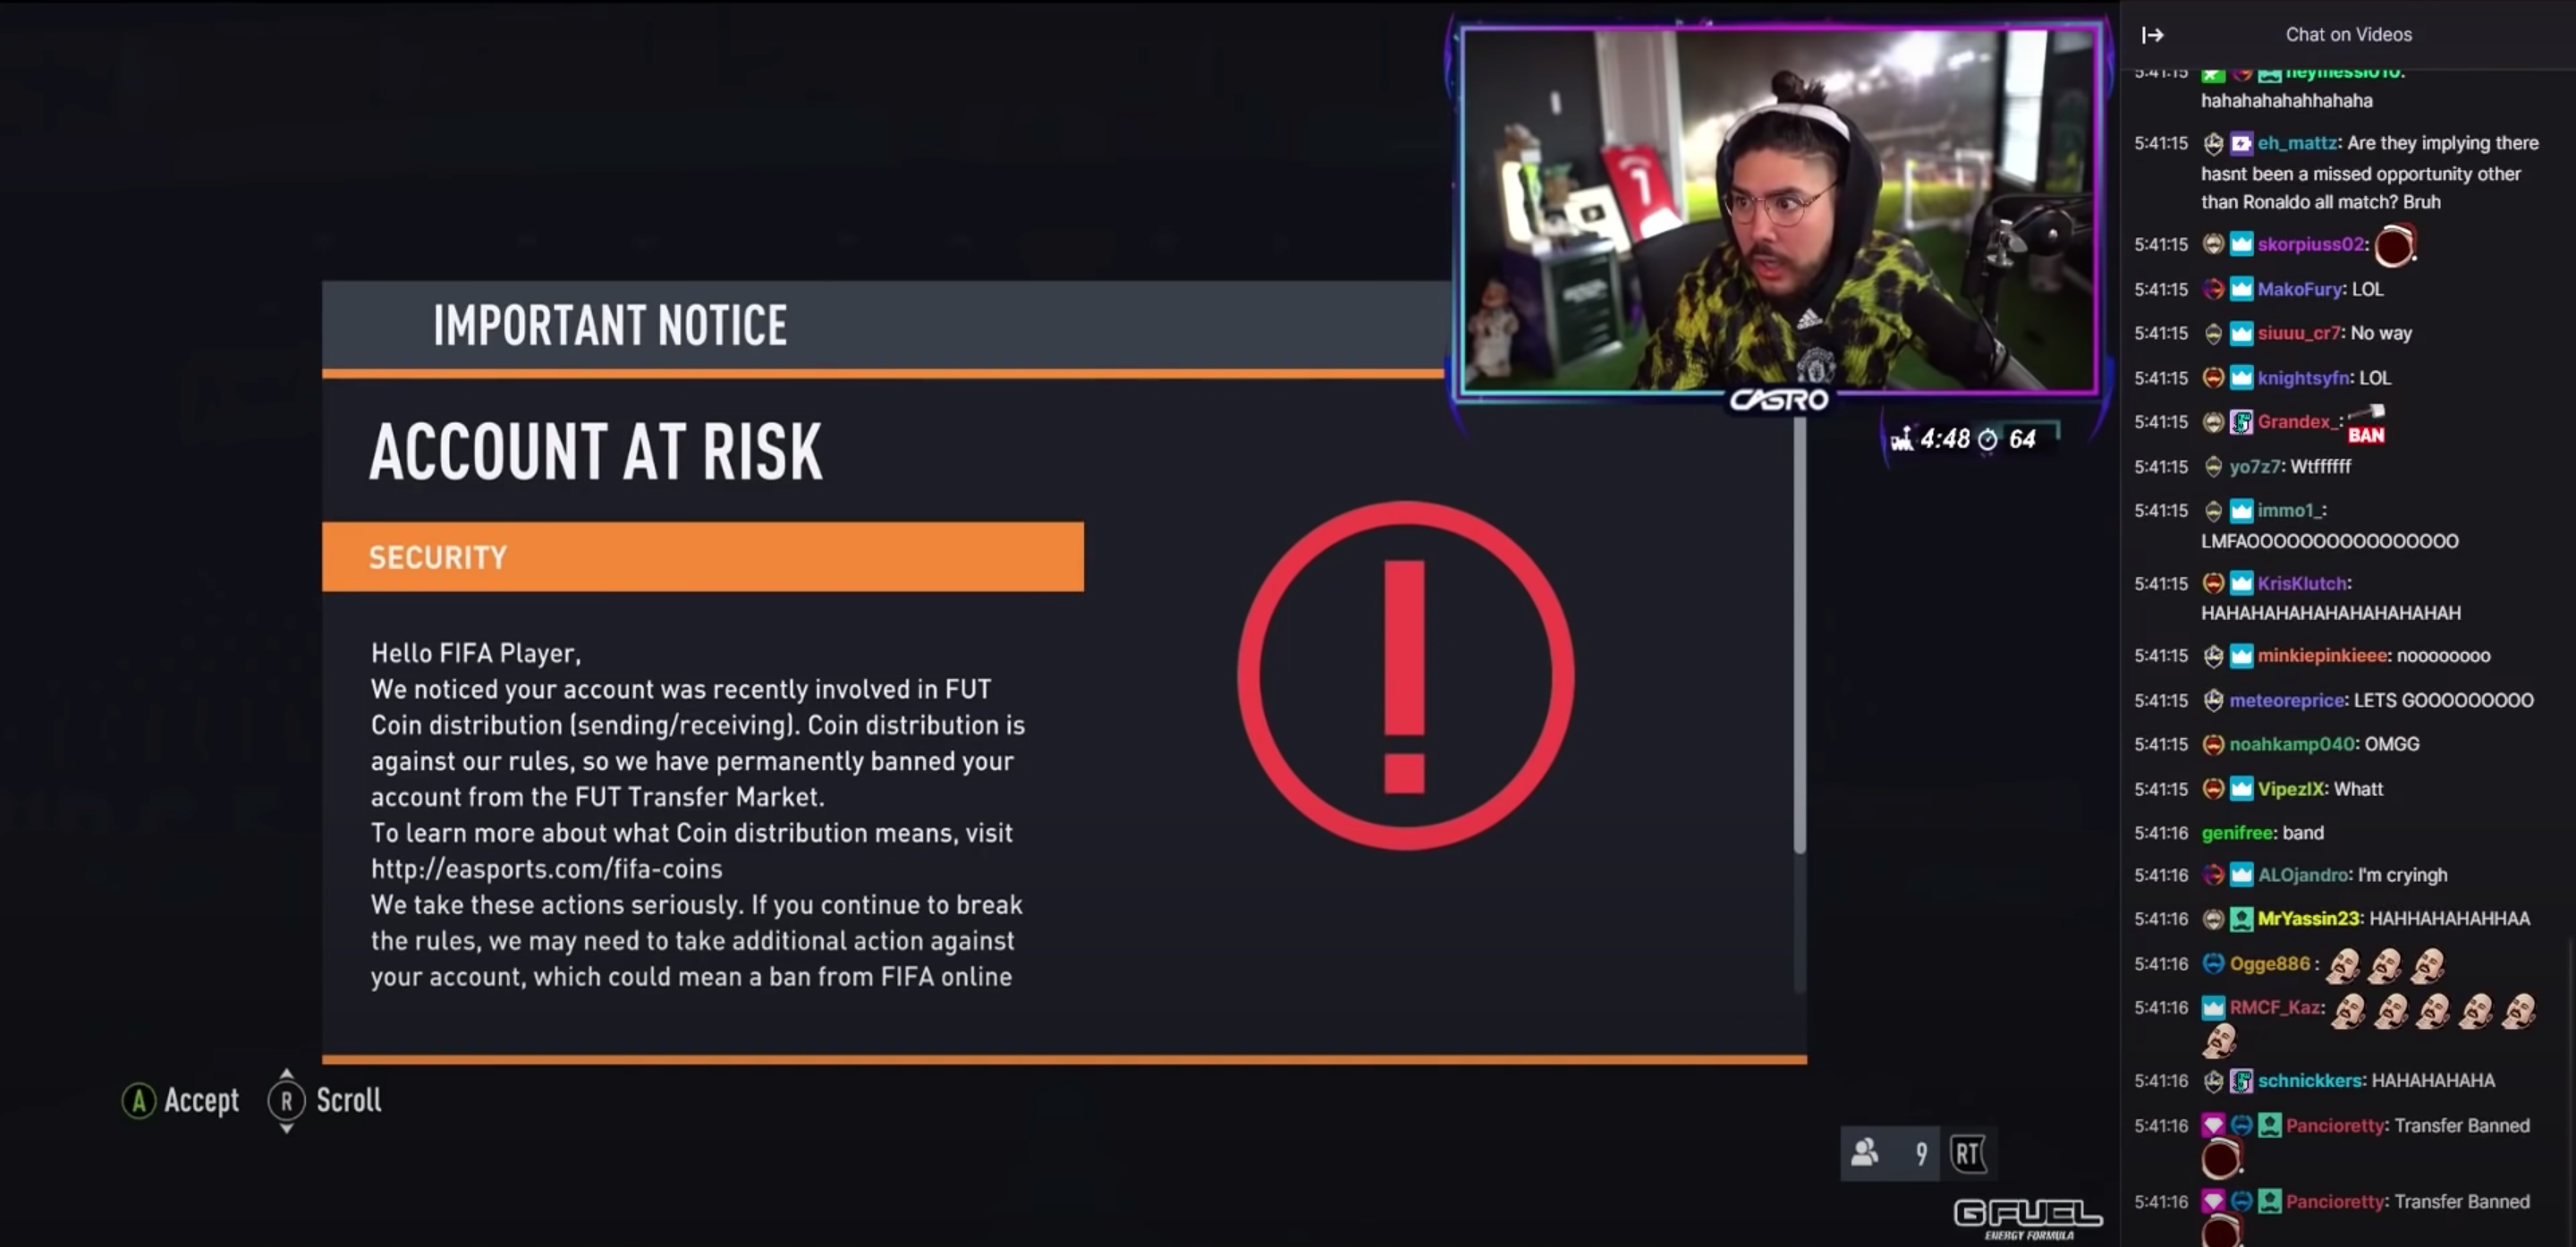 Castro1021 Reacts to Being Banned from FUT Trade Market